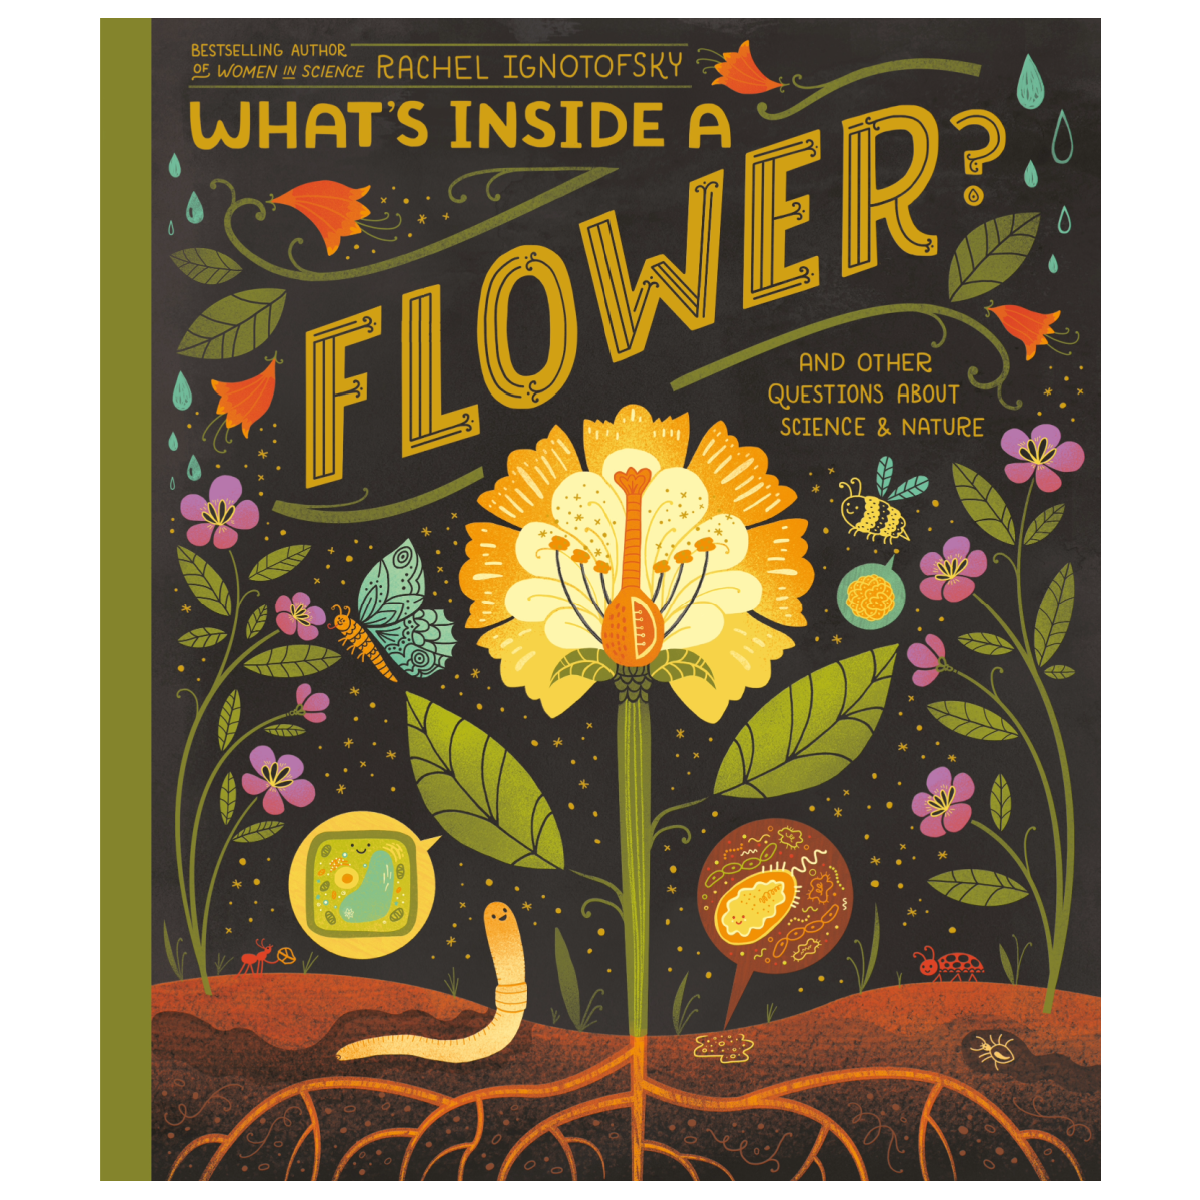 What's Inside A Flower?